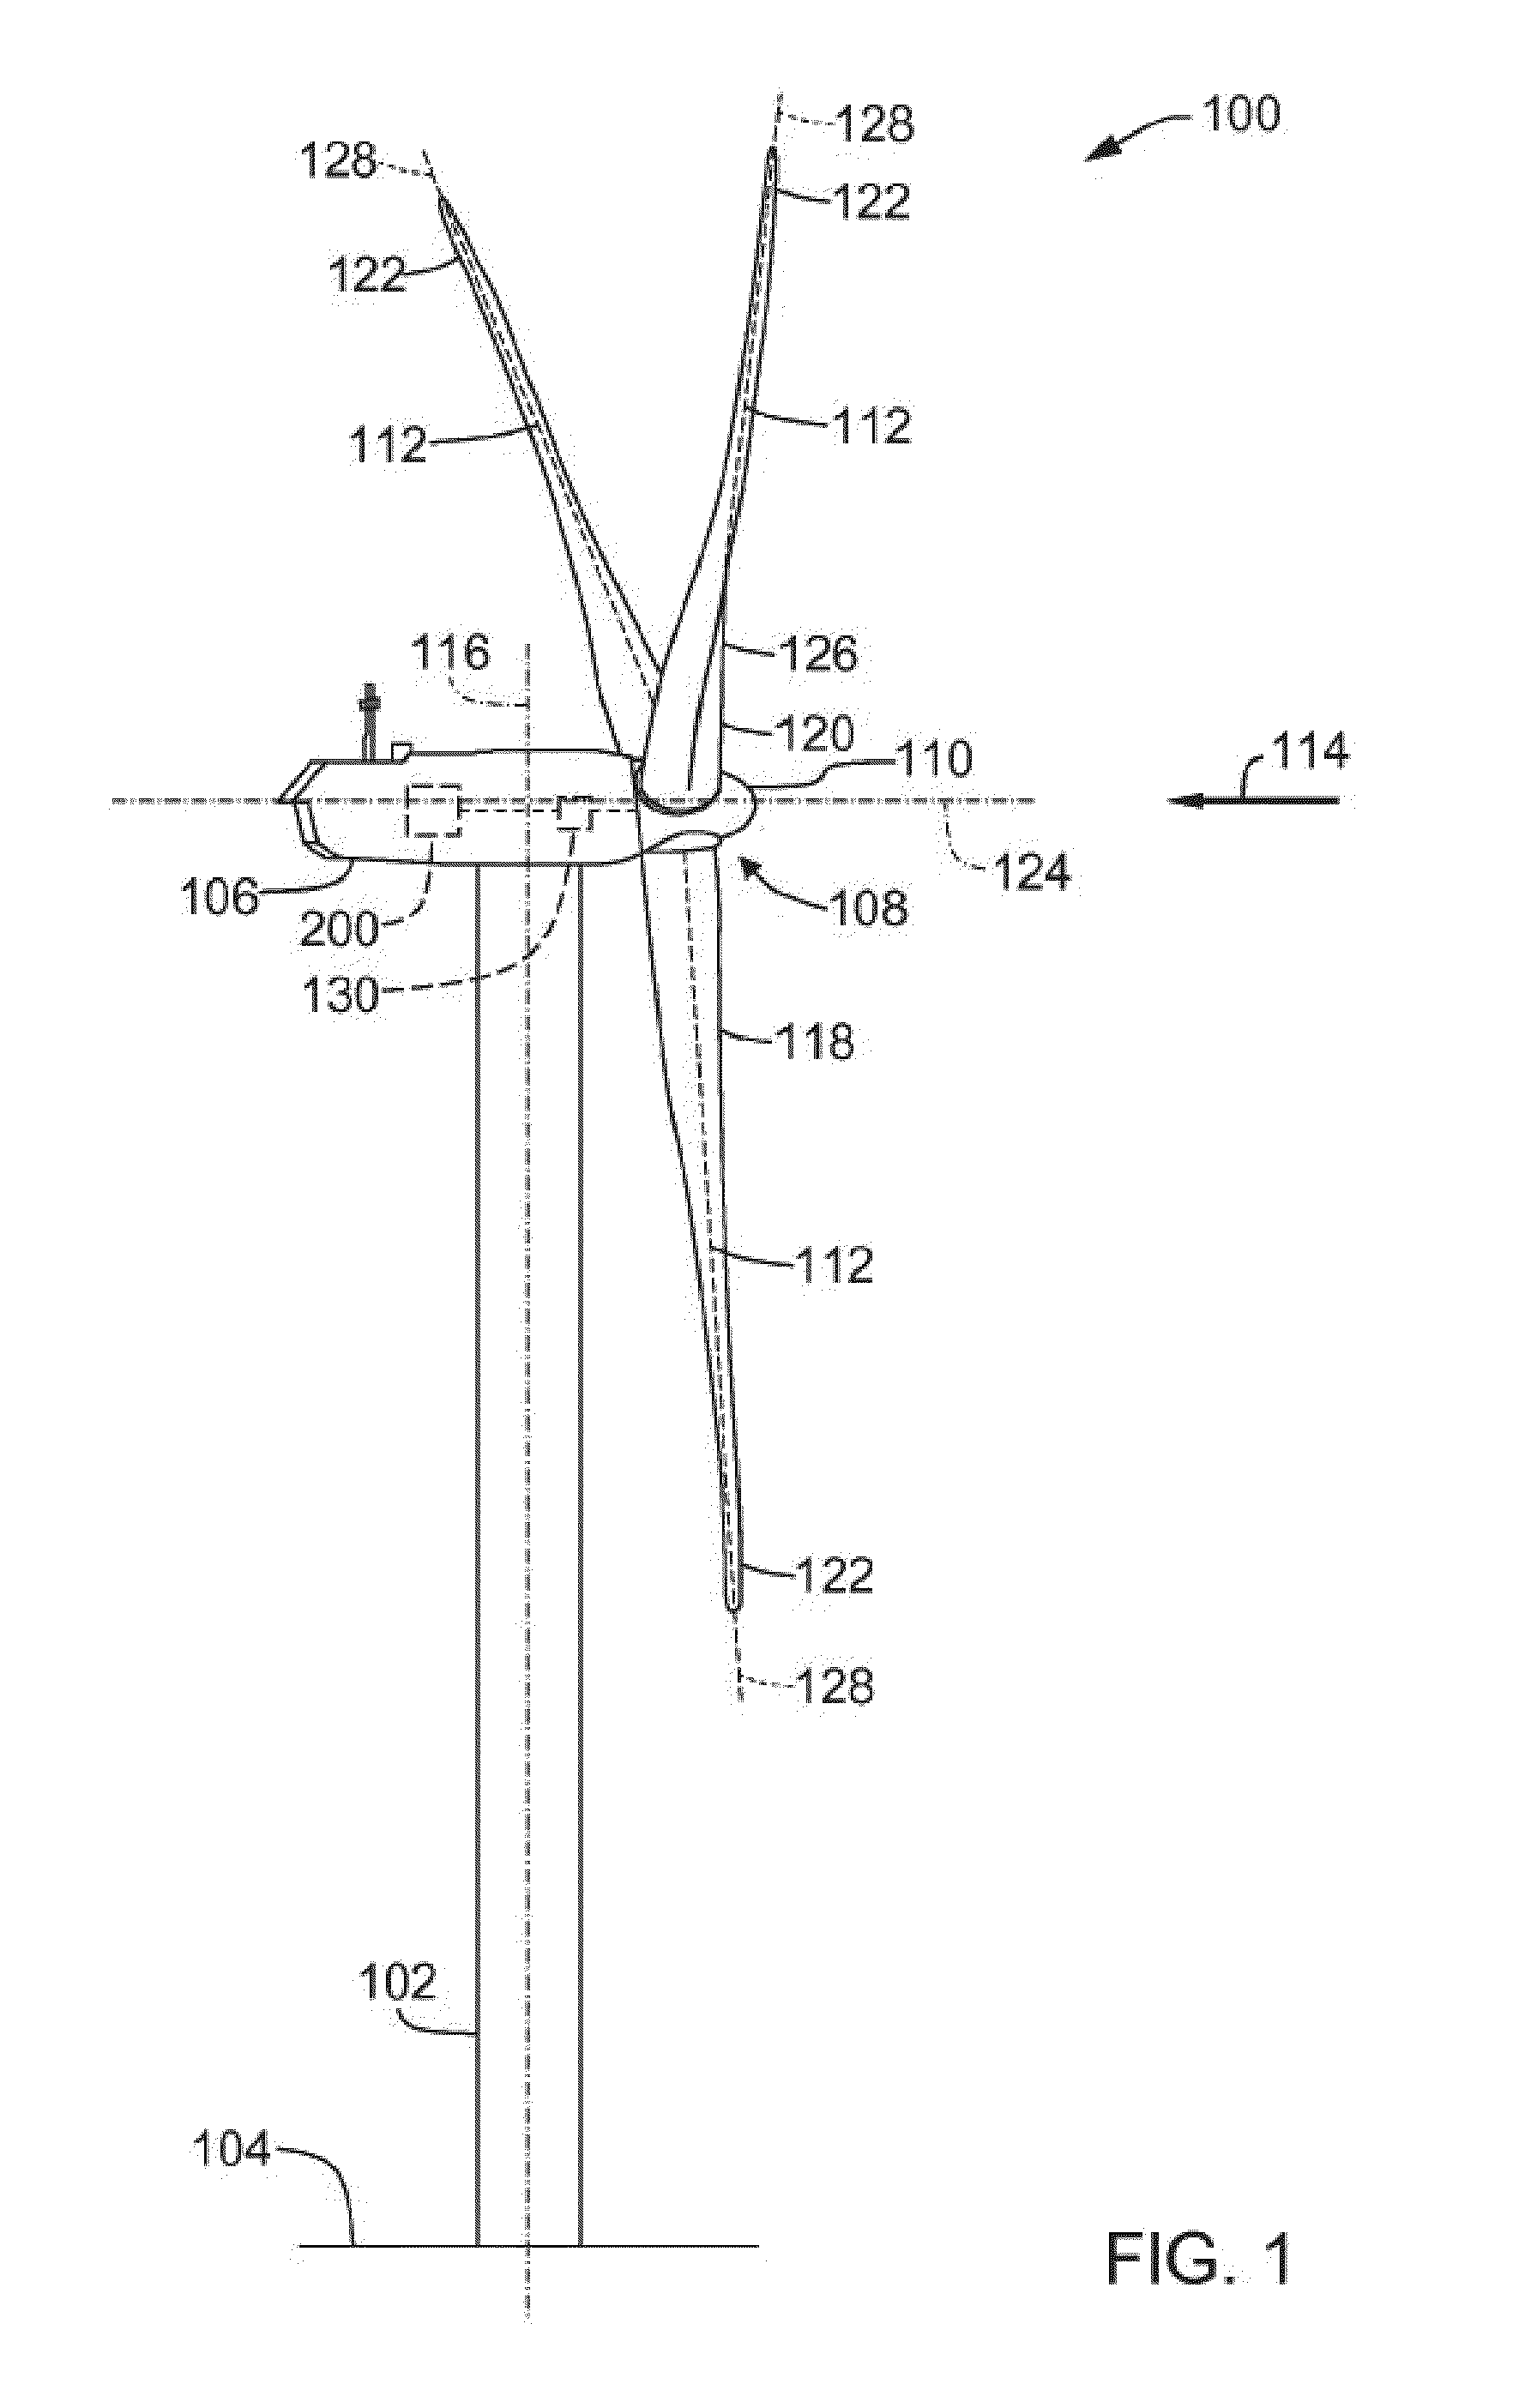 Method and system for repairing or servicing a wye ring